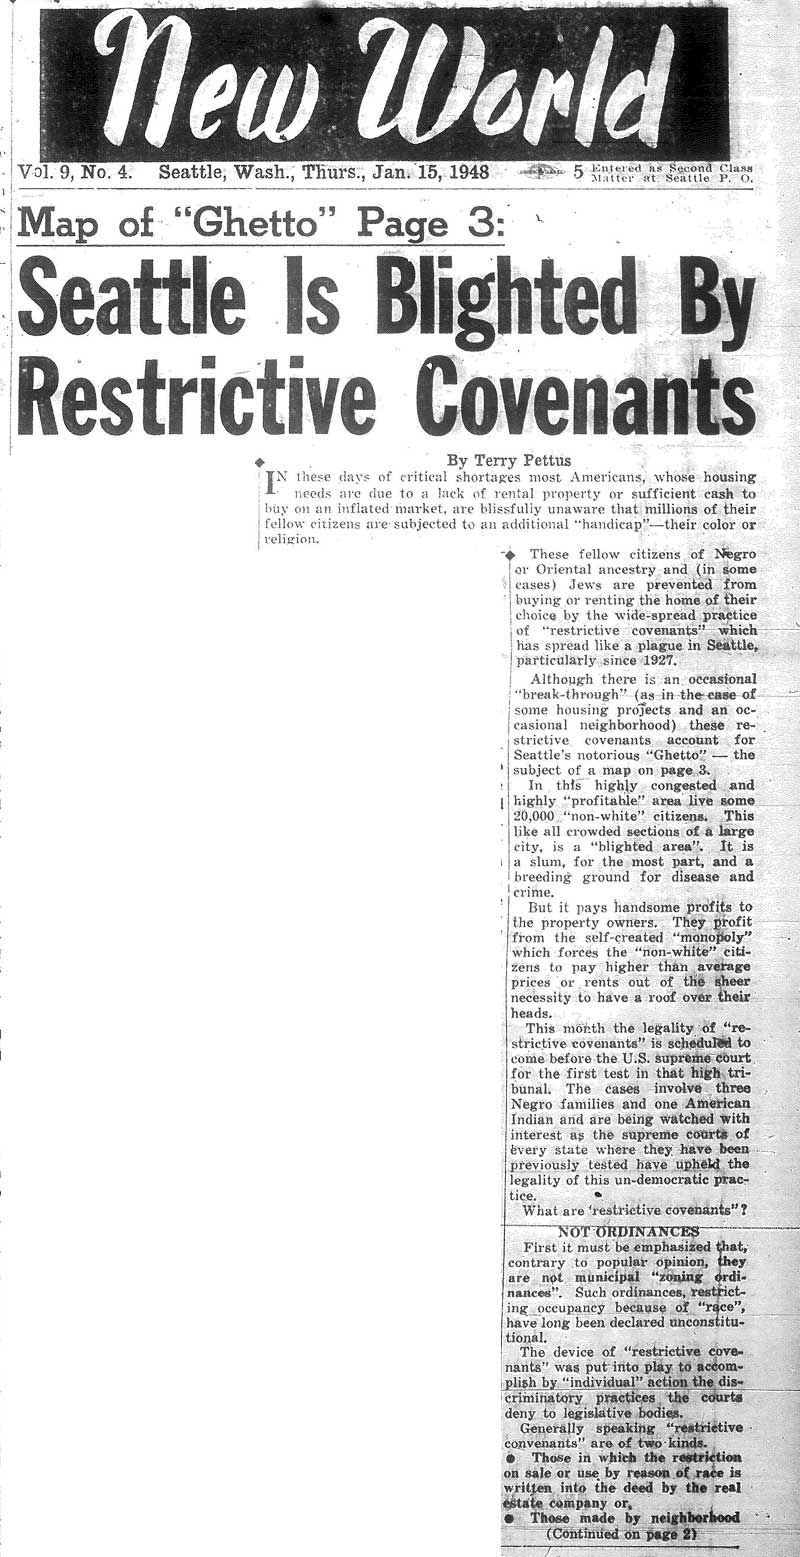 The Impact Of Restrictive Covenants On The